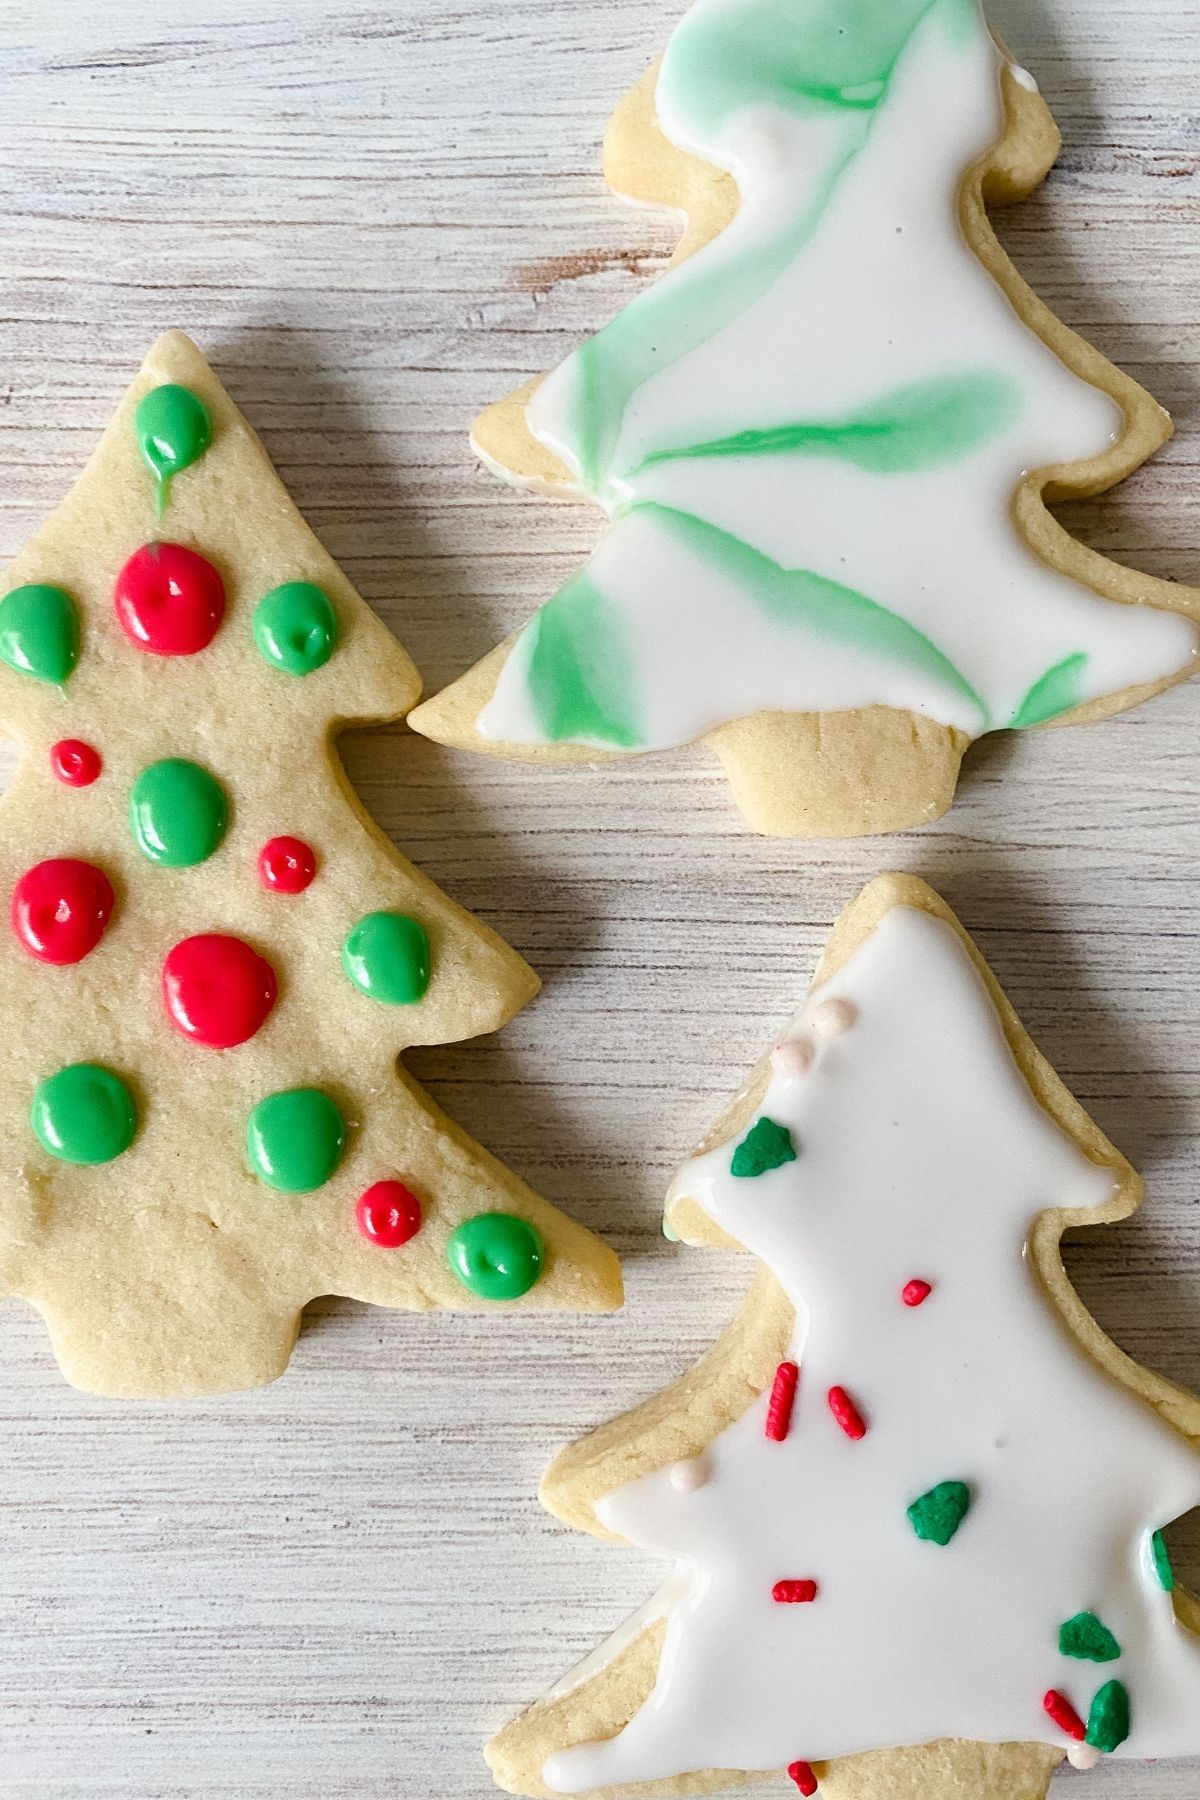 Decorated sugar cookies on tray